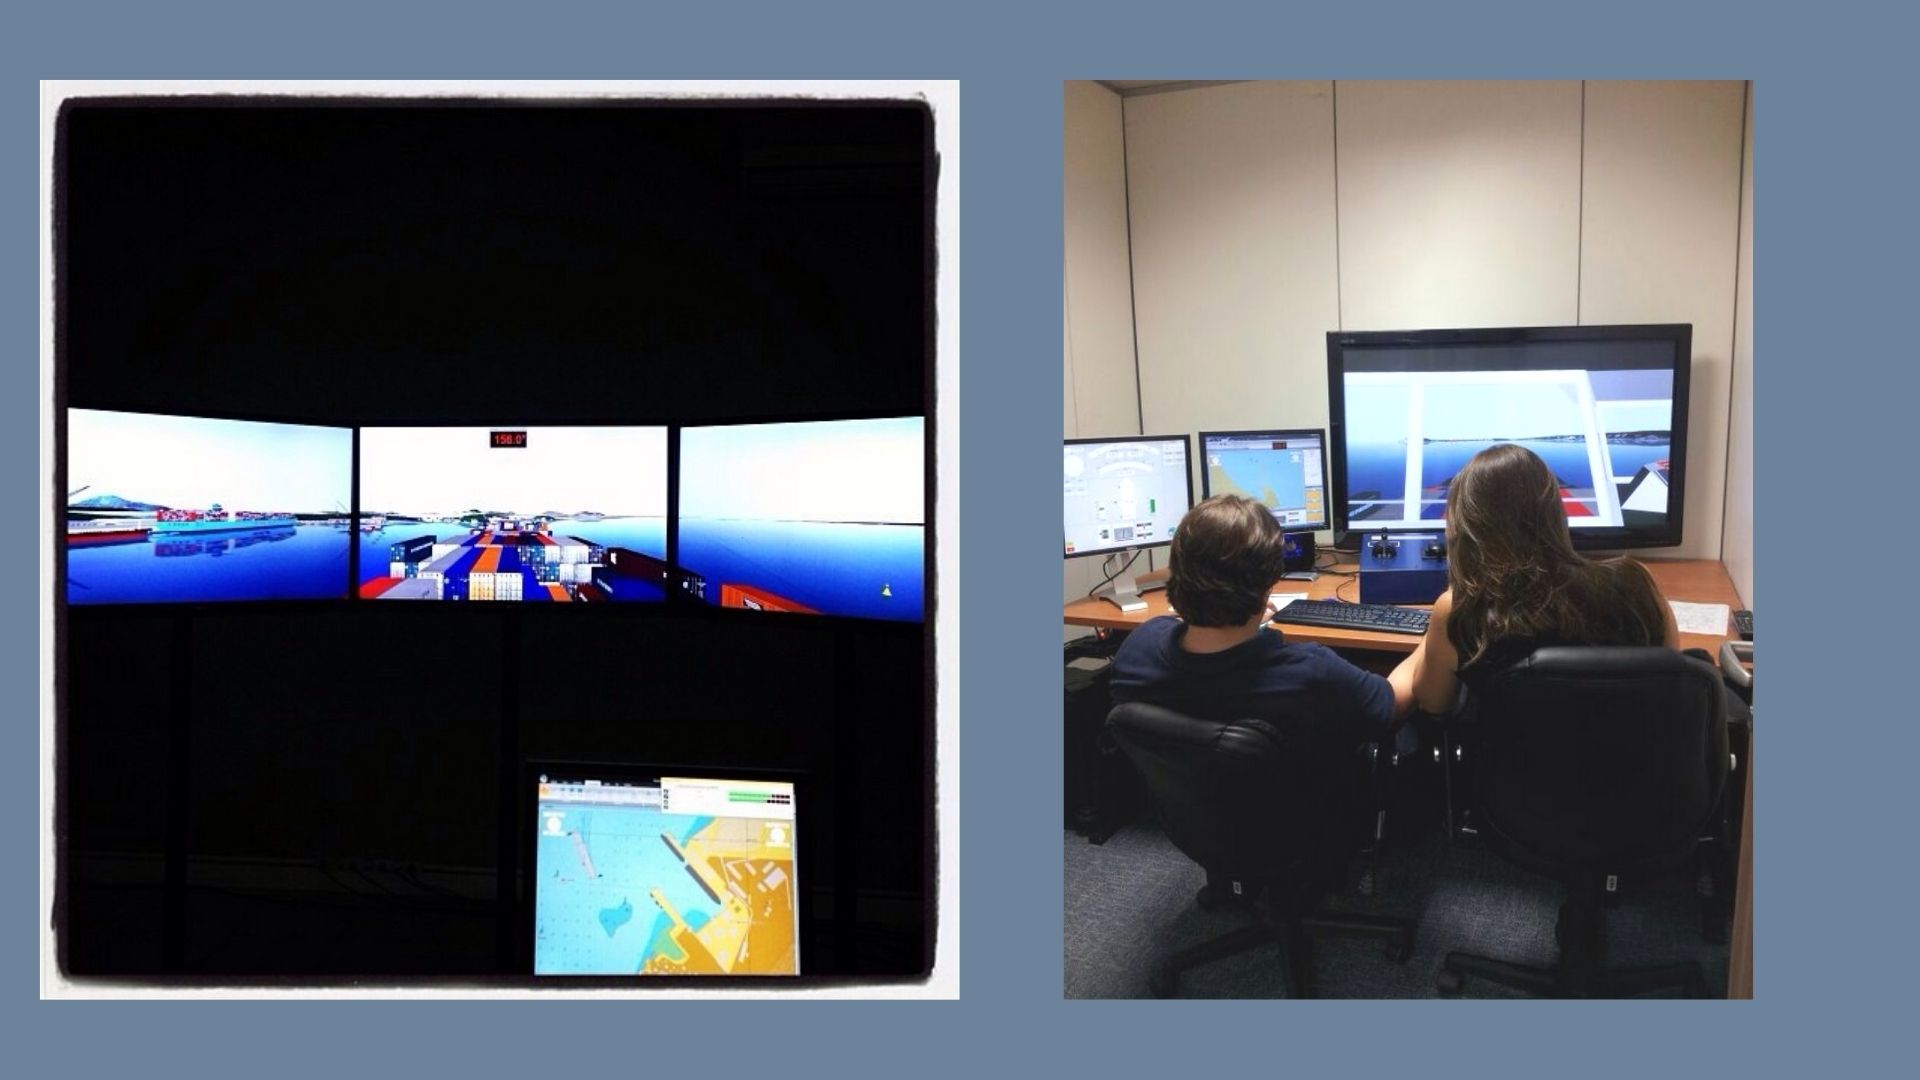 Two images side by side: left one is a photo of 3 screens with a ship simulator and on the left is a photo from behind of 2 people look at similar screens of a simulator.